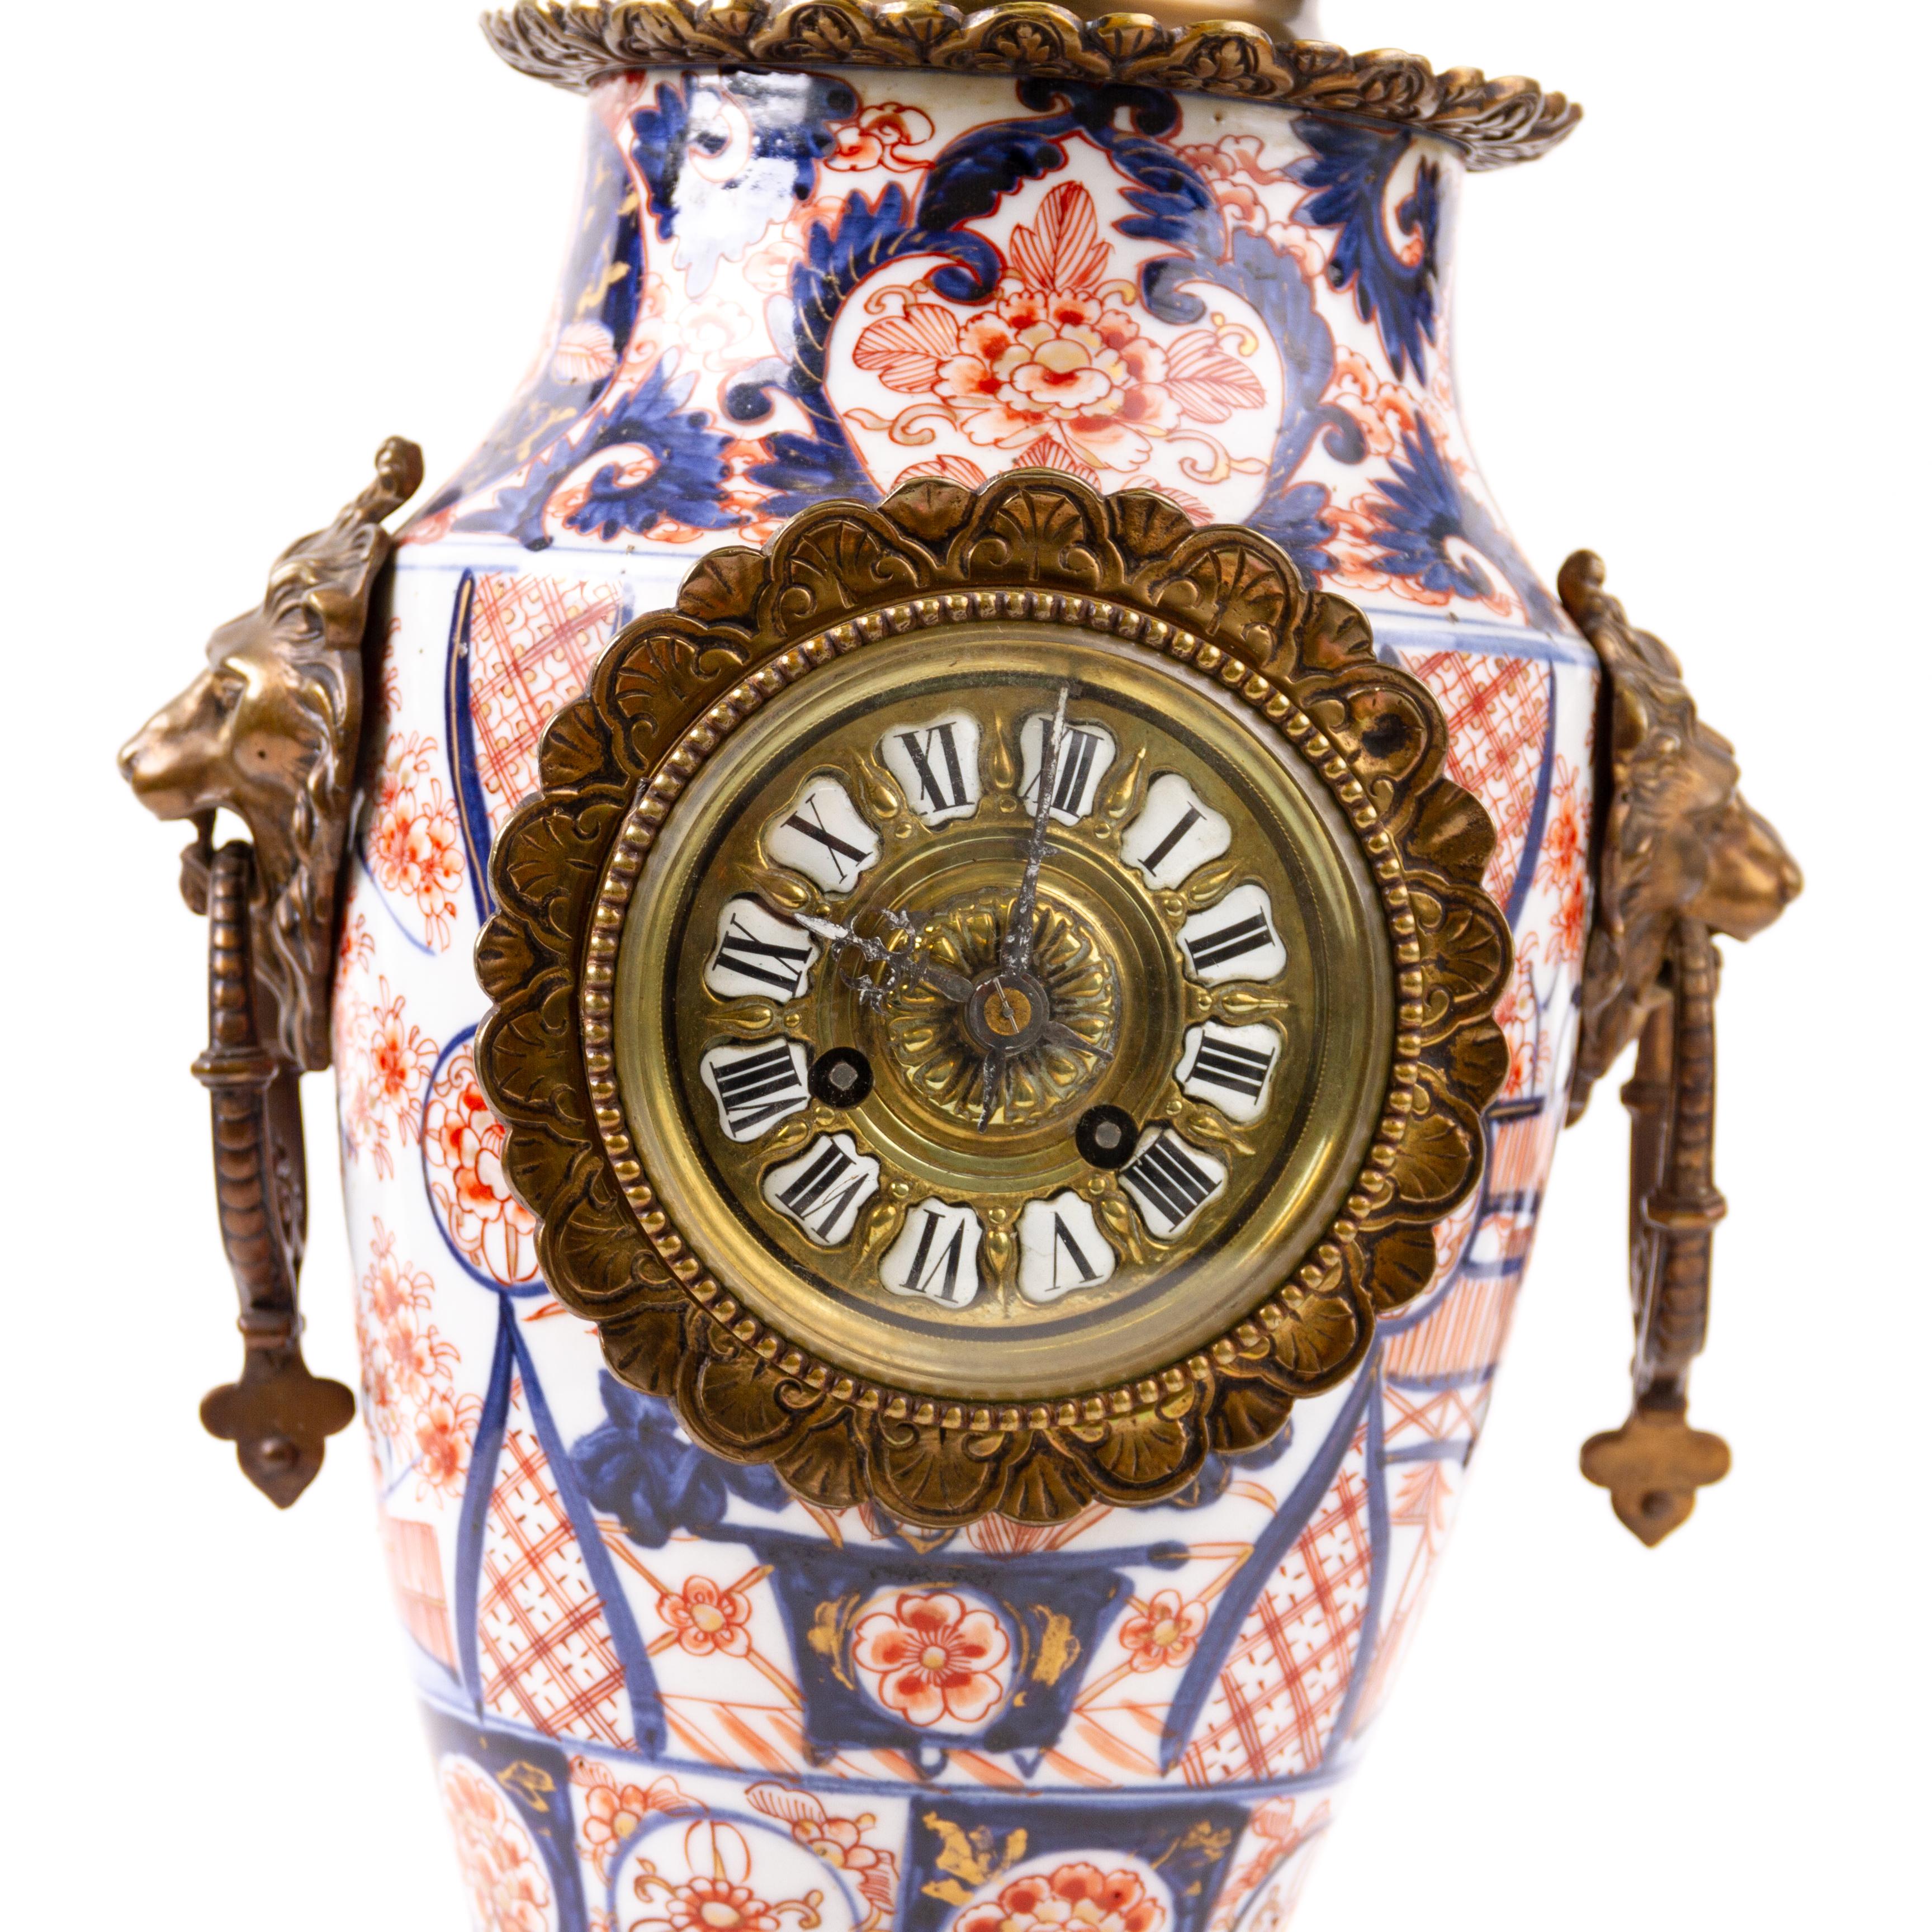 Japanese Imari Porcelain Bronze Mounted French Mantle Clock 19thC
Good condition overall, as seen.

Free international shipping.